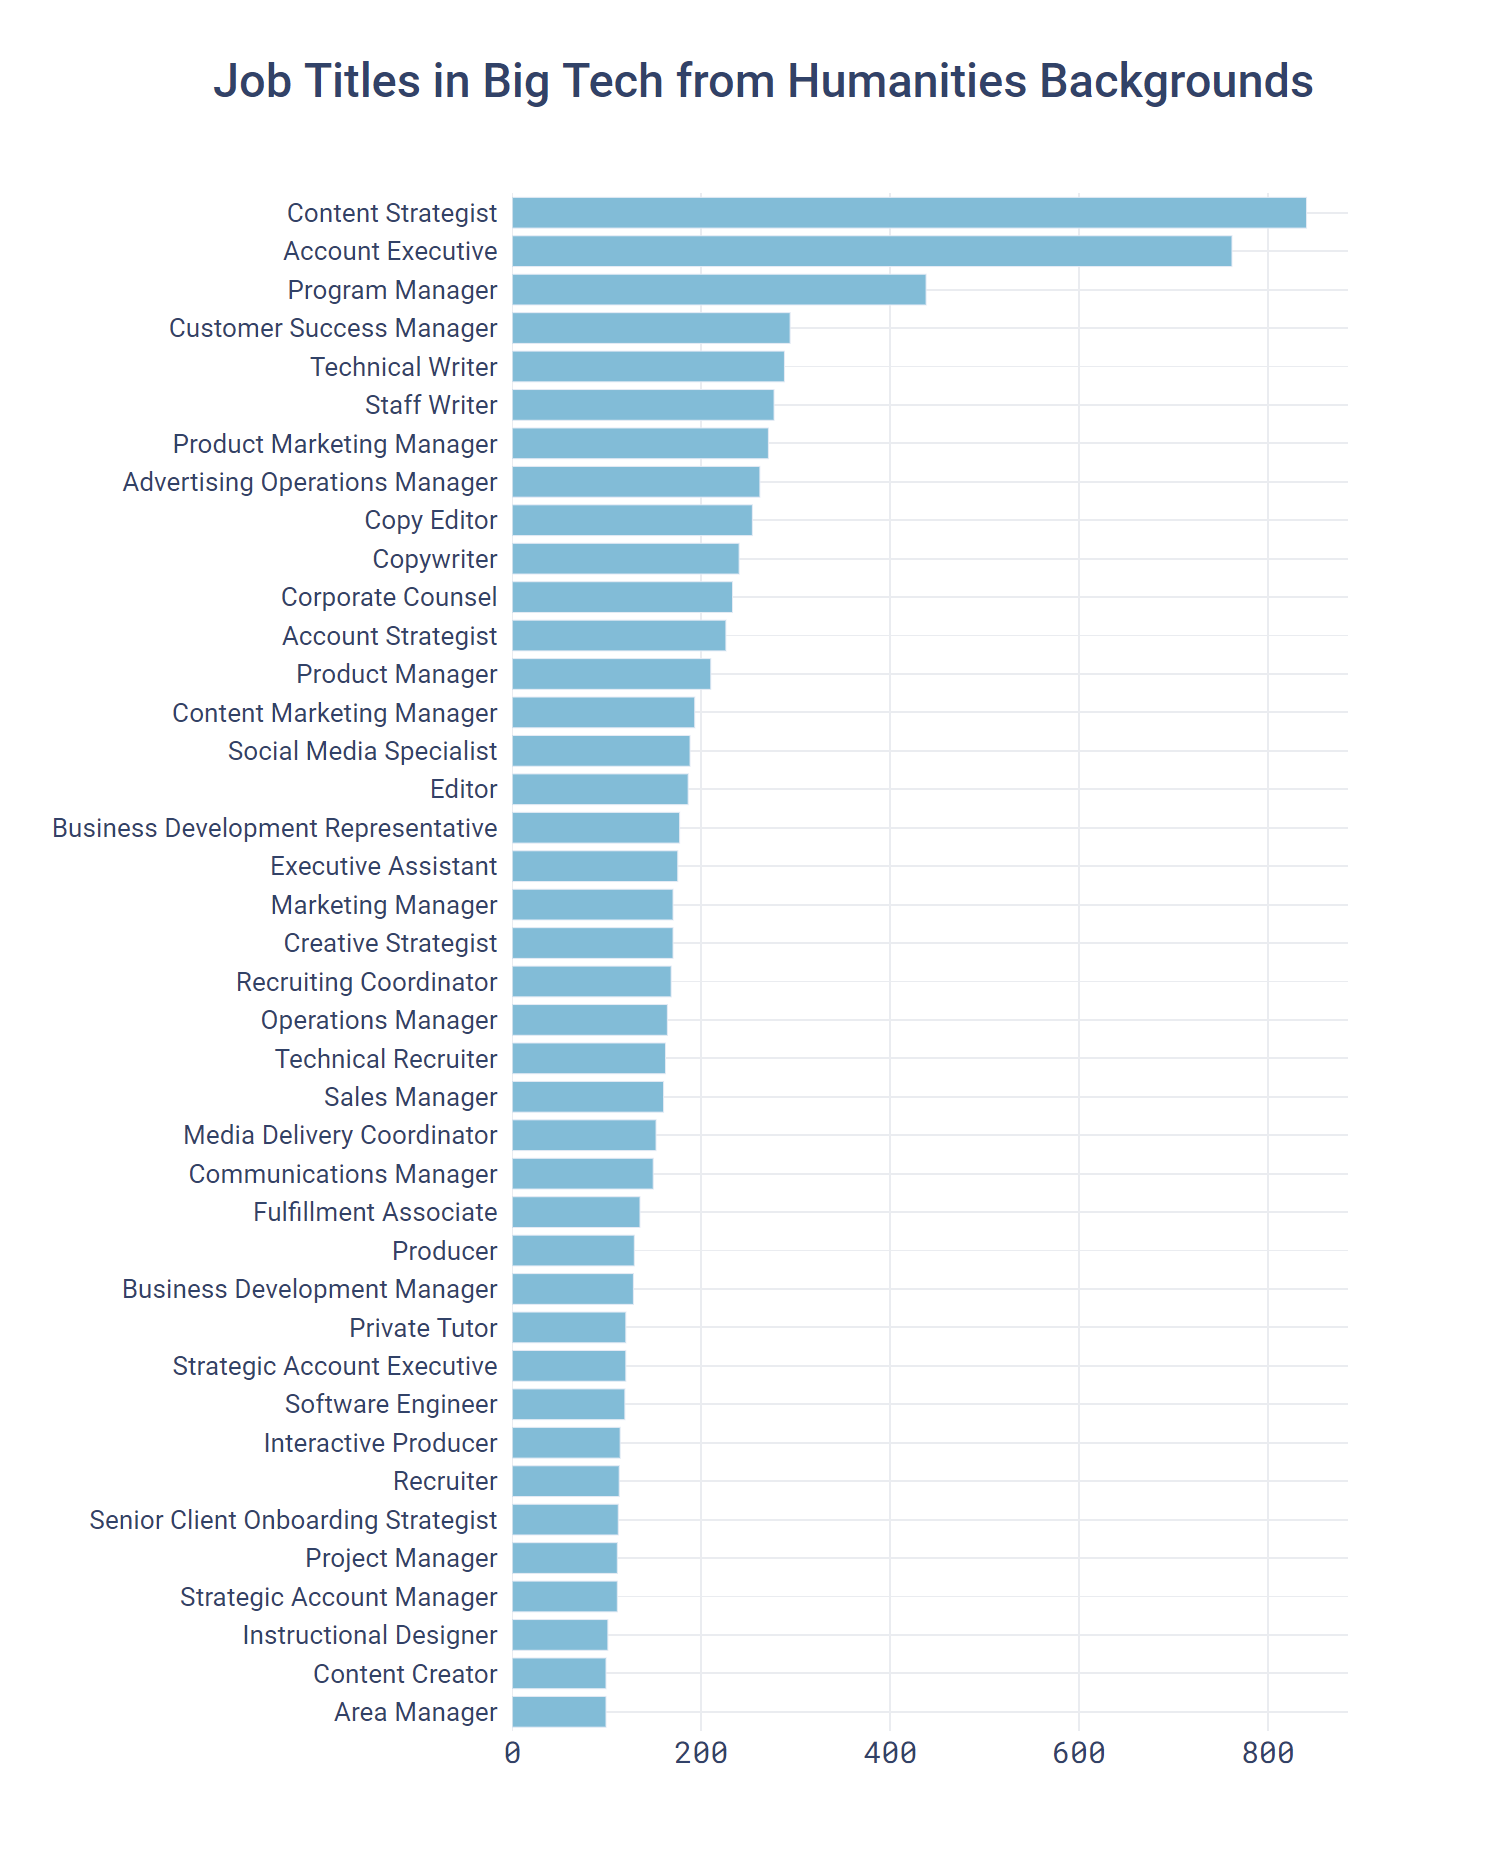 Job Titles in Big Tech from Humanities Backgrounds